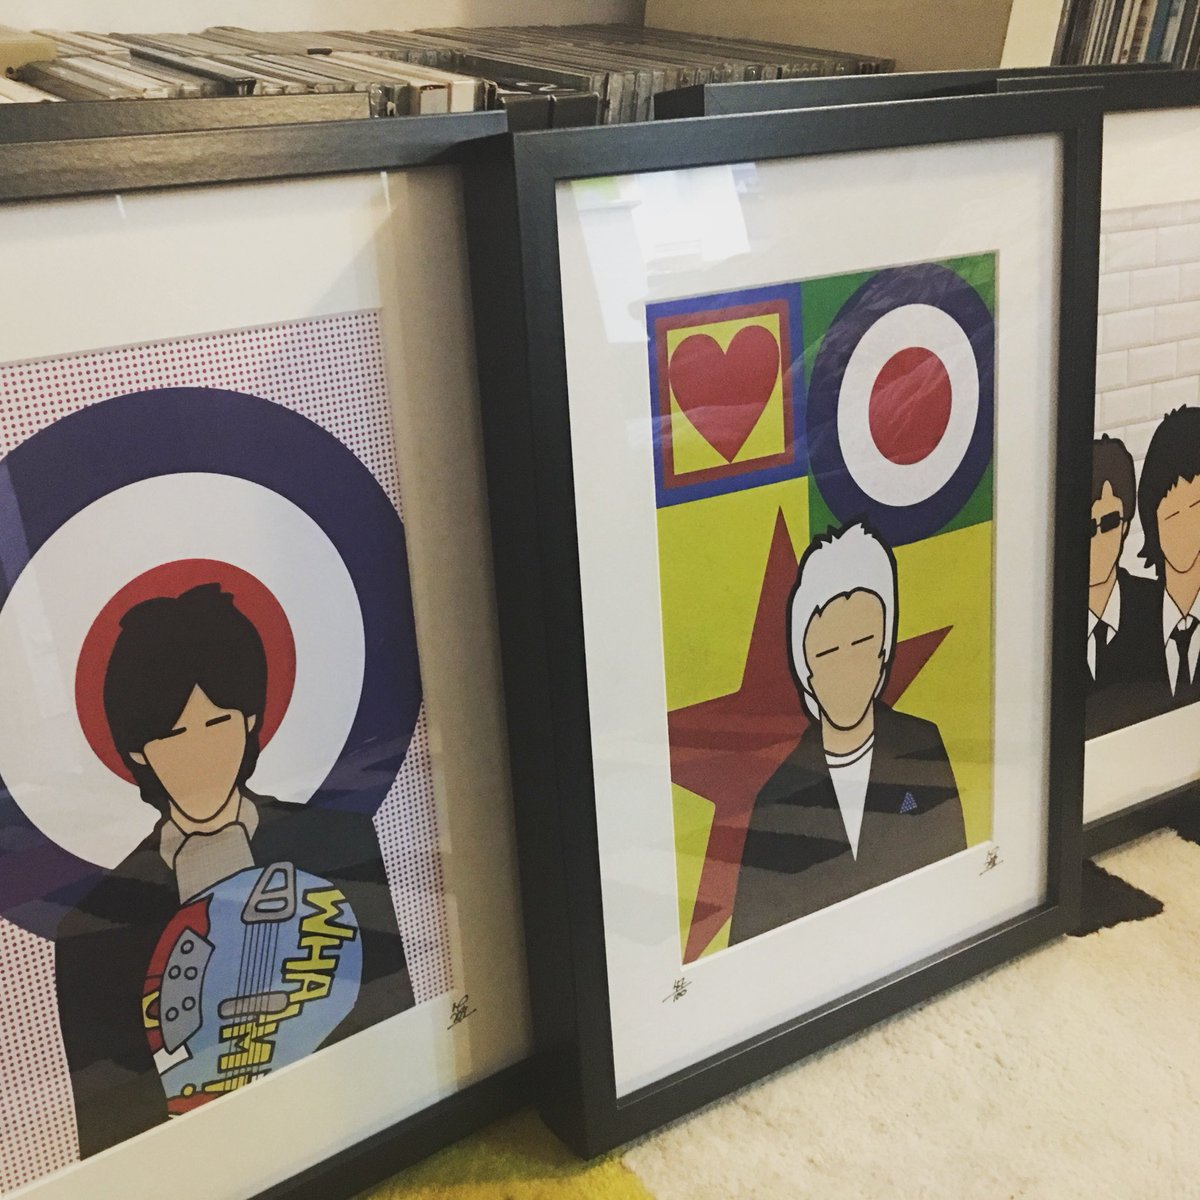 Seems like the Weller fans are getting their Christmas orders in early. Get yours at vinylsoul.co.uk  and @loafersvinyl #chrsitmas #gifts #musicillustration #musicartist #framedart #smallbusiness #smallshop #popart #coolartwork